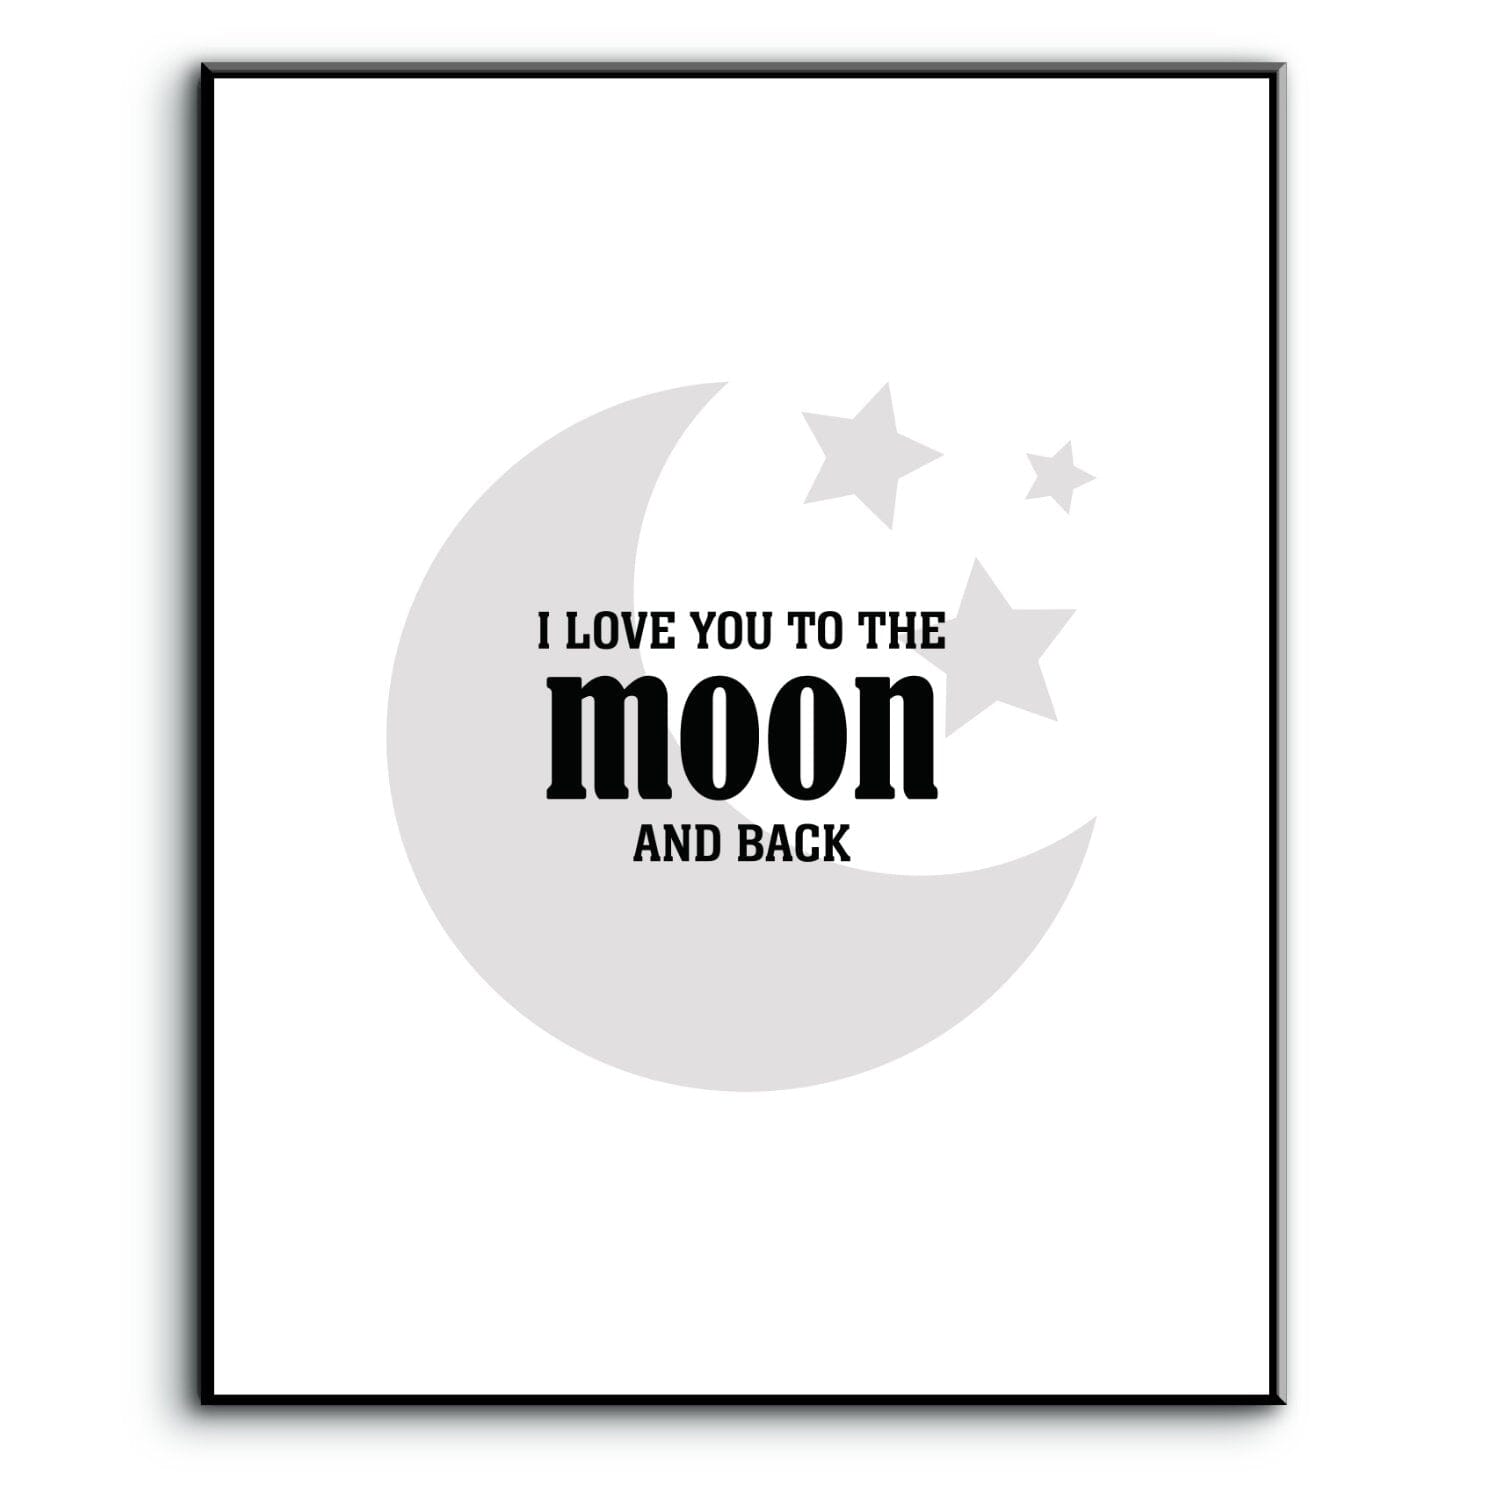 I Love You to the Moon and Back - Wise and Witty Art Wise and Wiseass Quotes Song Lyrics Art 8x10 Plaque Mount 